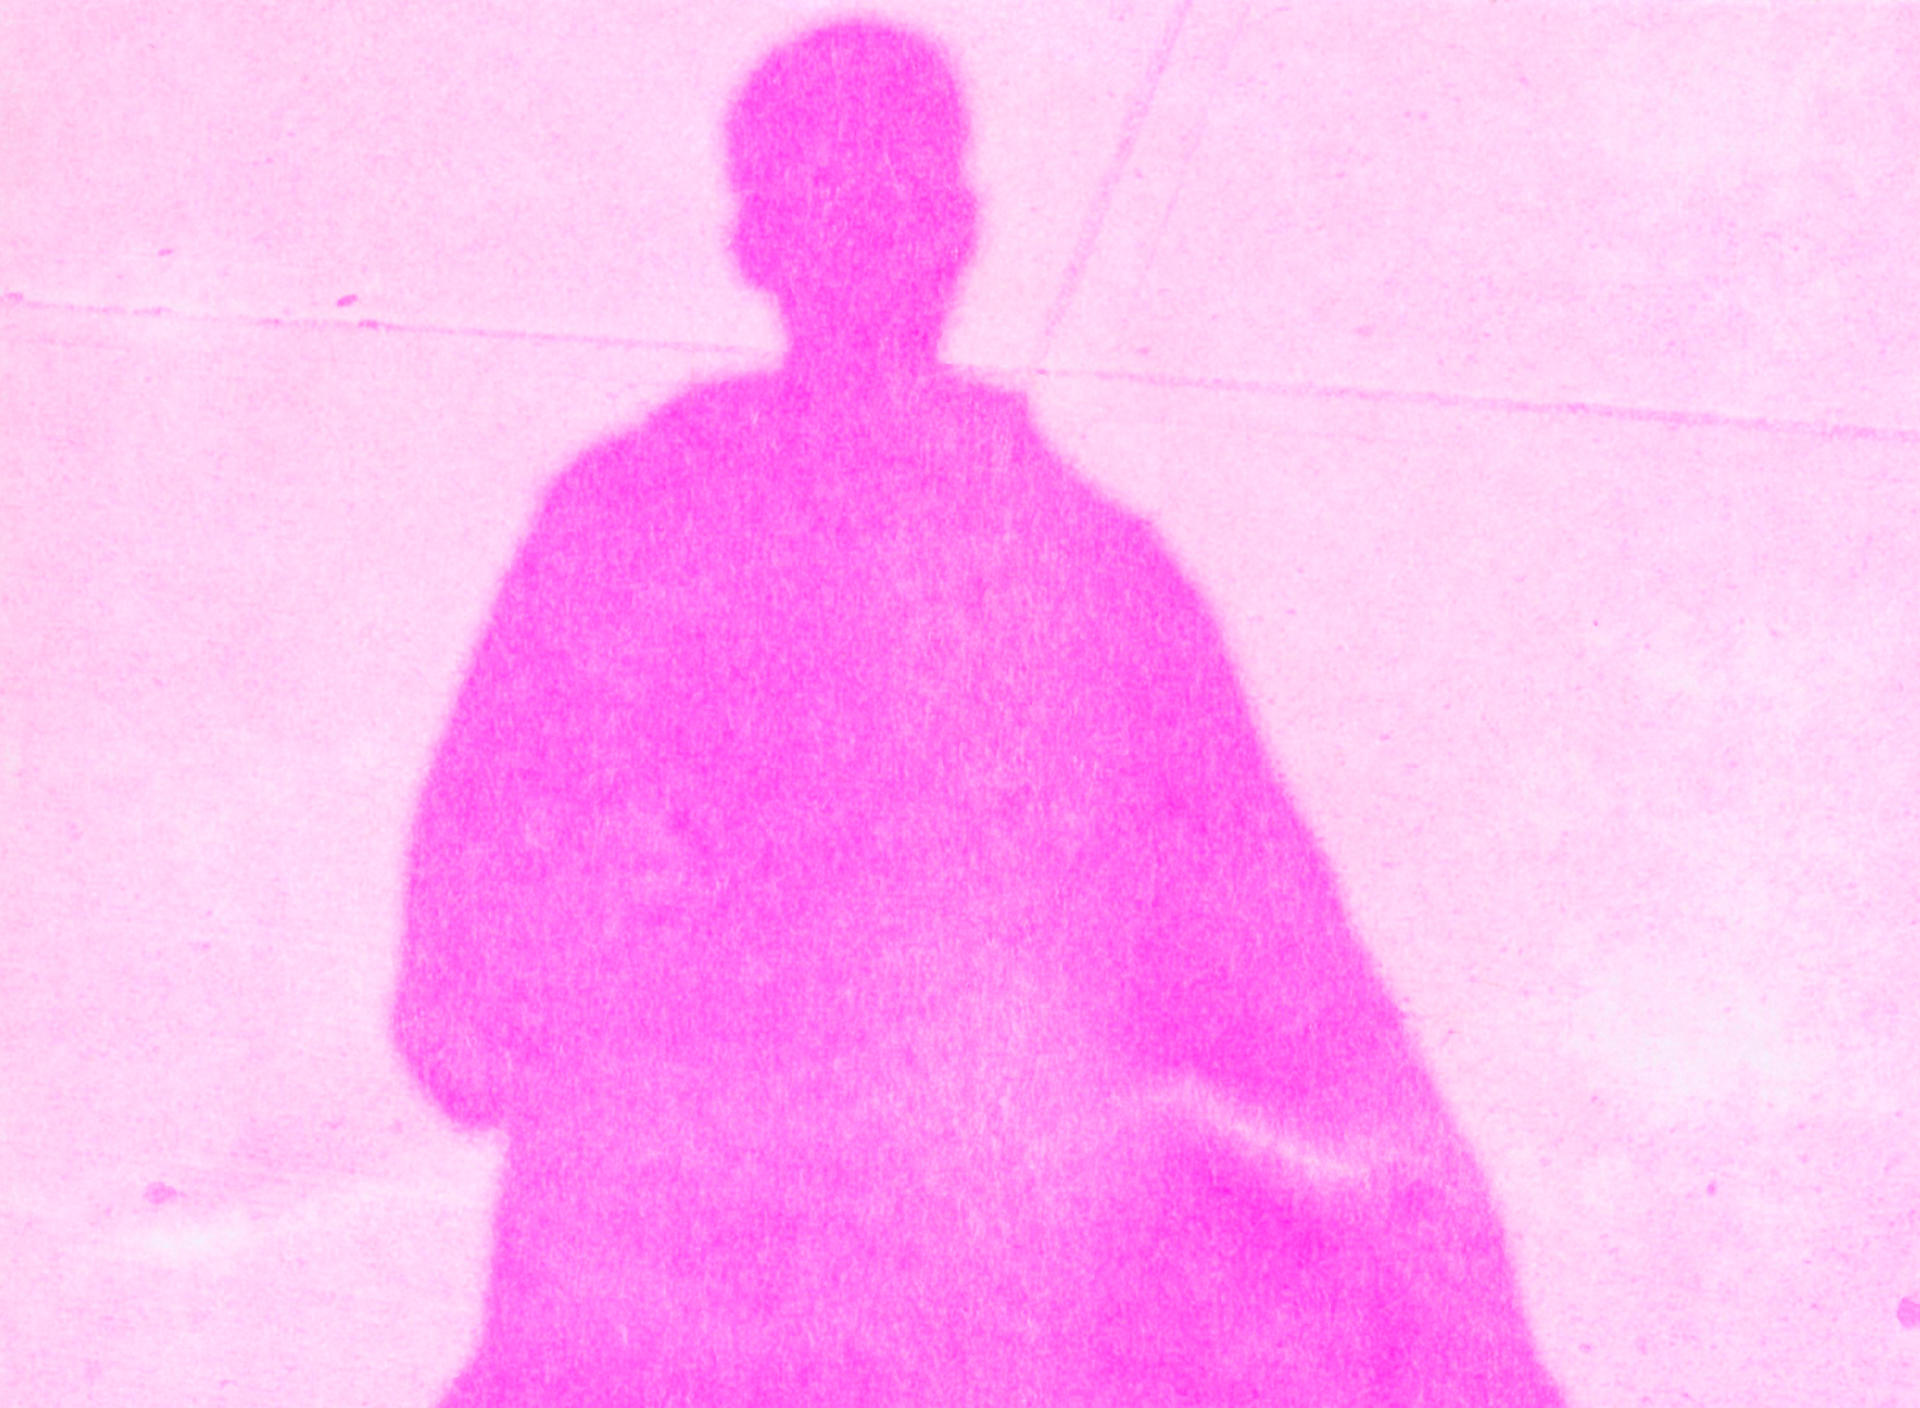 Pink and white treated image of Harshal's shadow